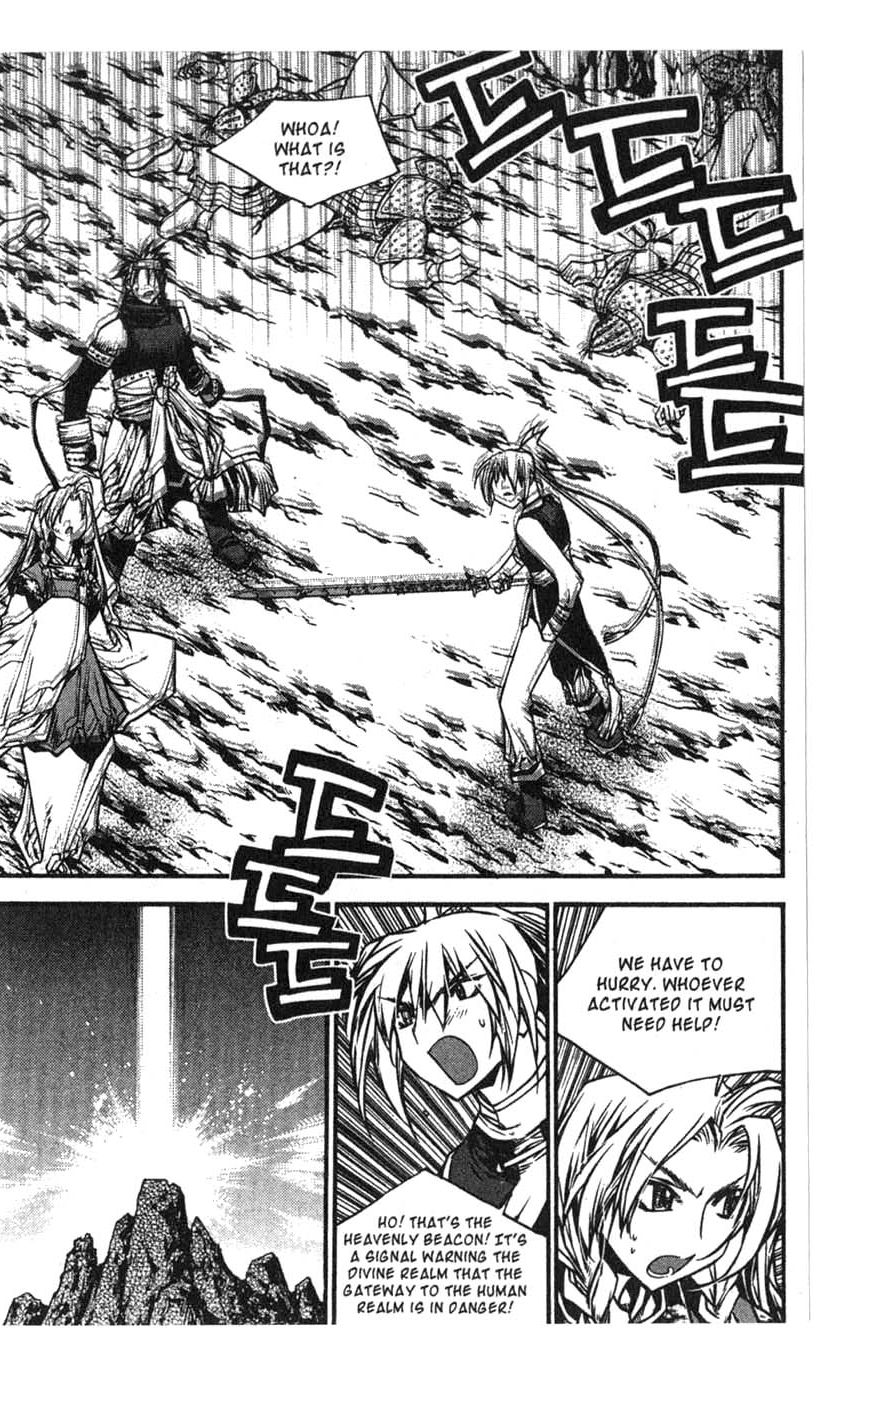 Chronicles of the Cursed Sword Vol. 17 Ch. 68 The Heavenly Beacon